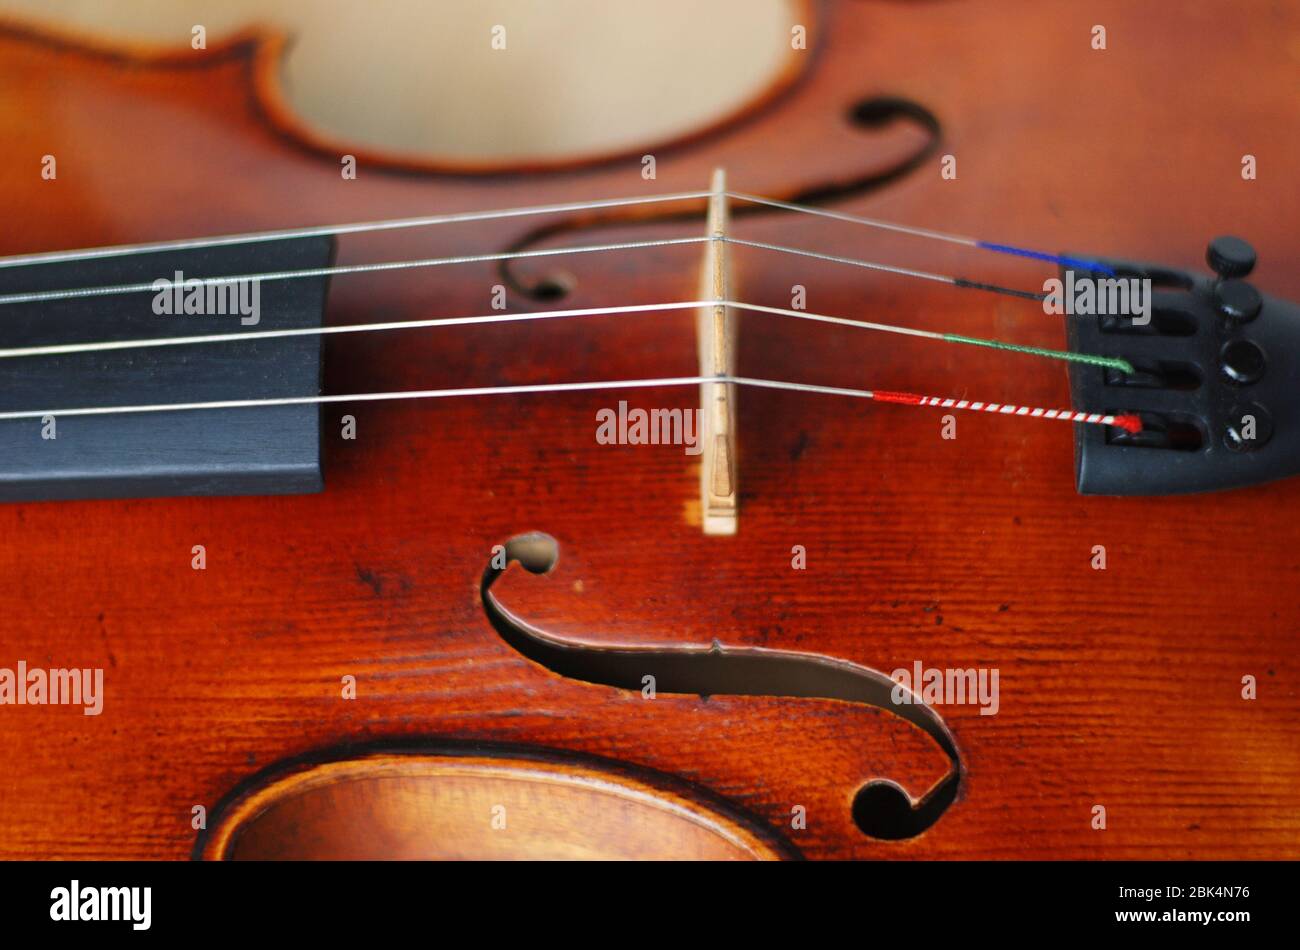 close up strings and corpus of a violin Stock Photo